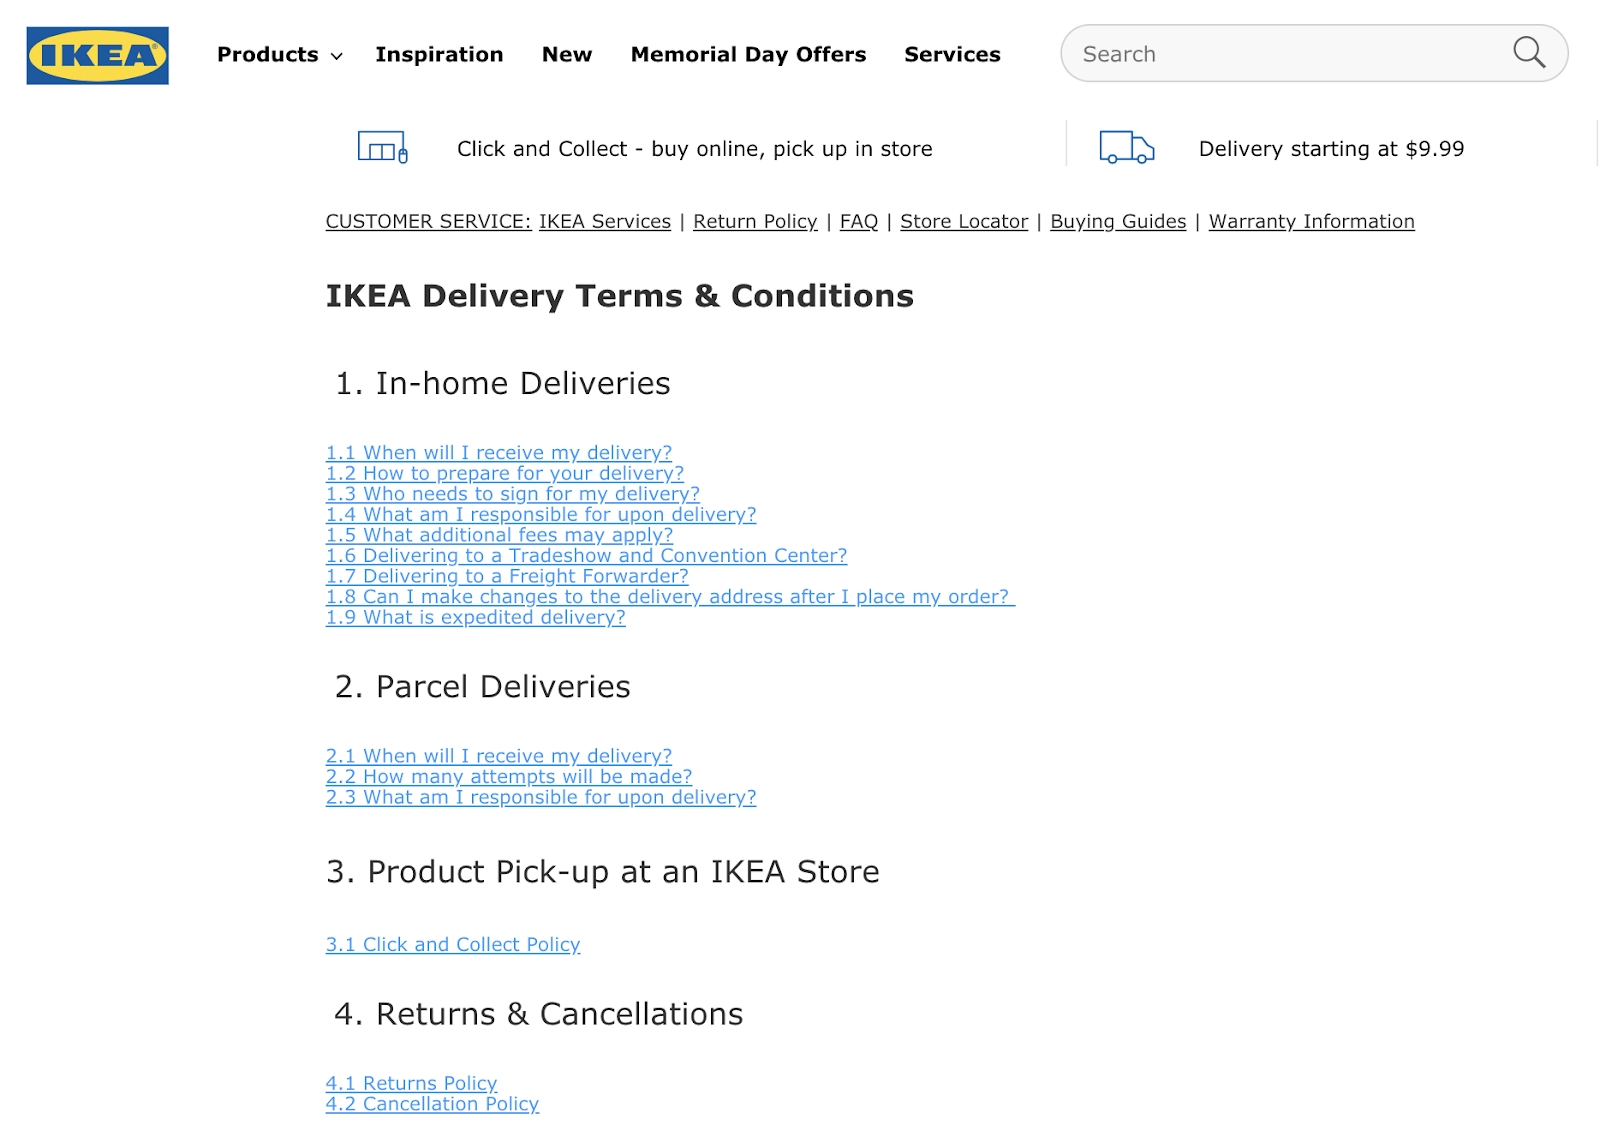 generate an ecommerce terms conditions terms of service retail invoice terms and conditions